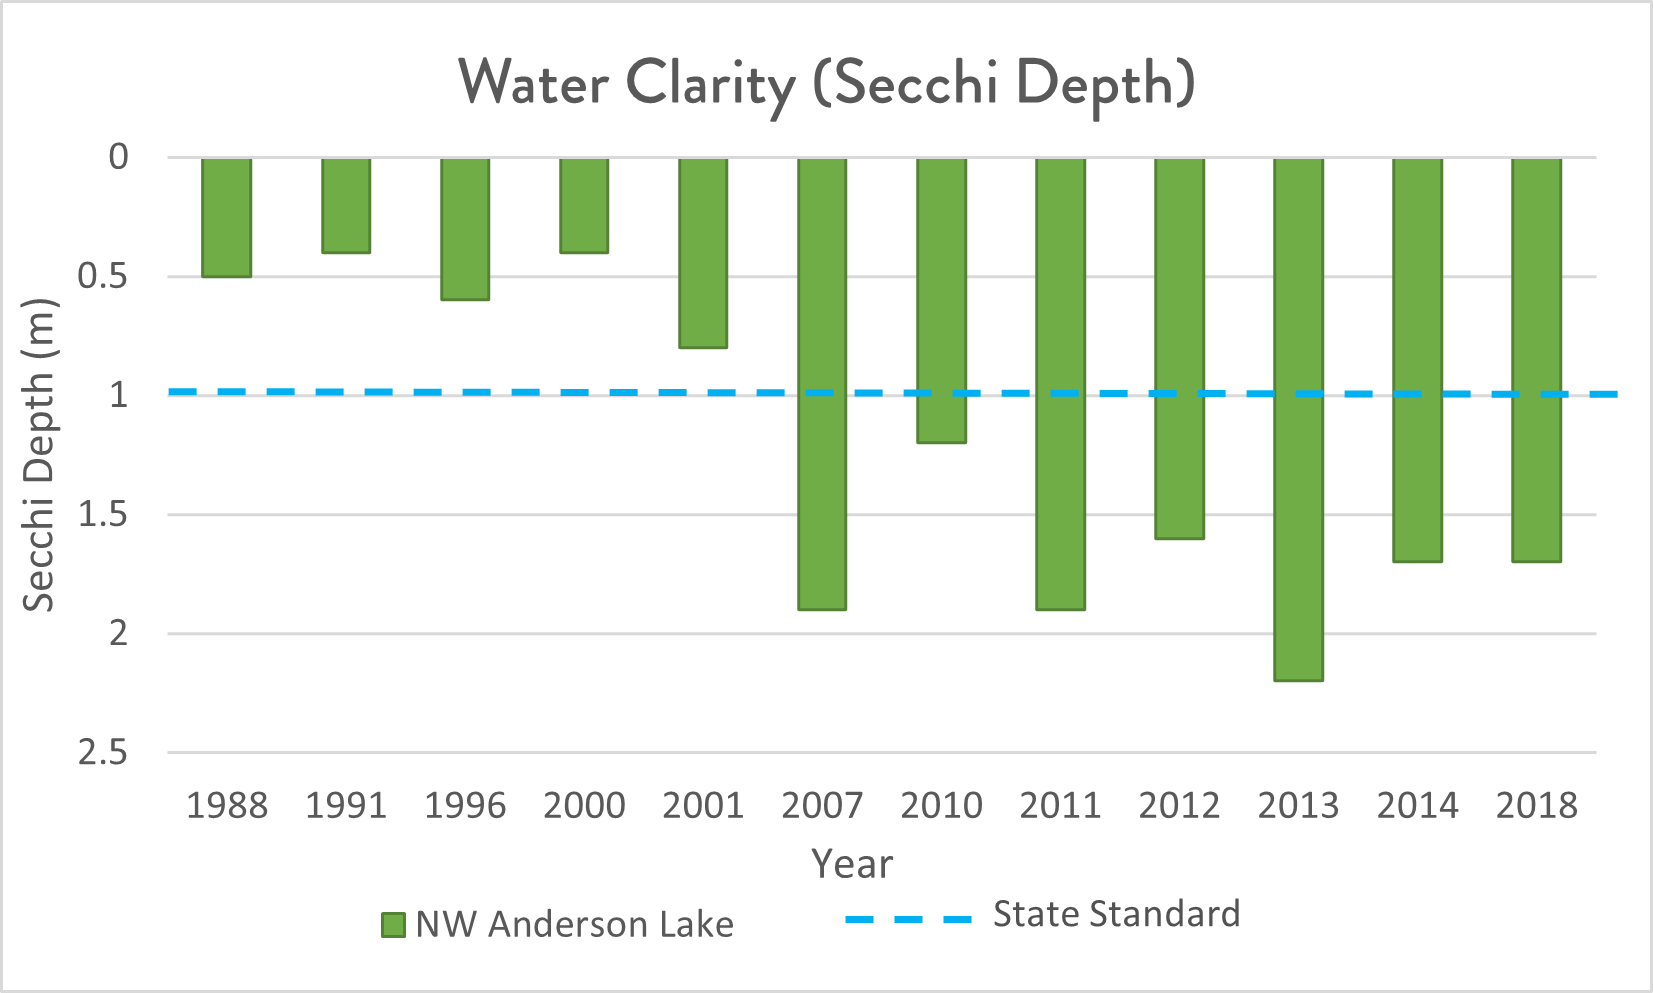 Graph of water clarity in NW Anderson Lake from 1988 to 2018 using secchi disk